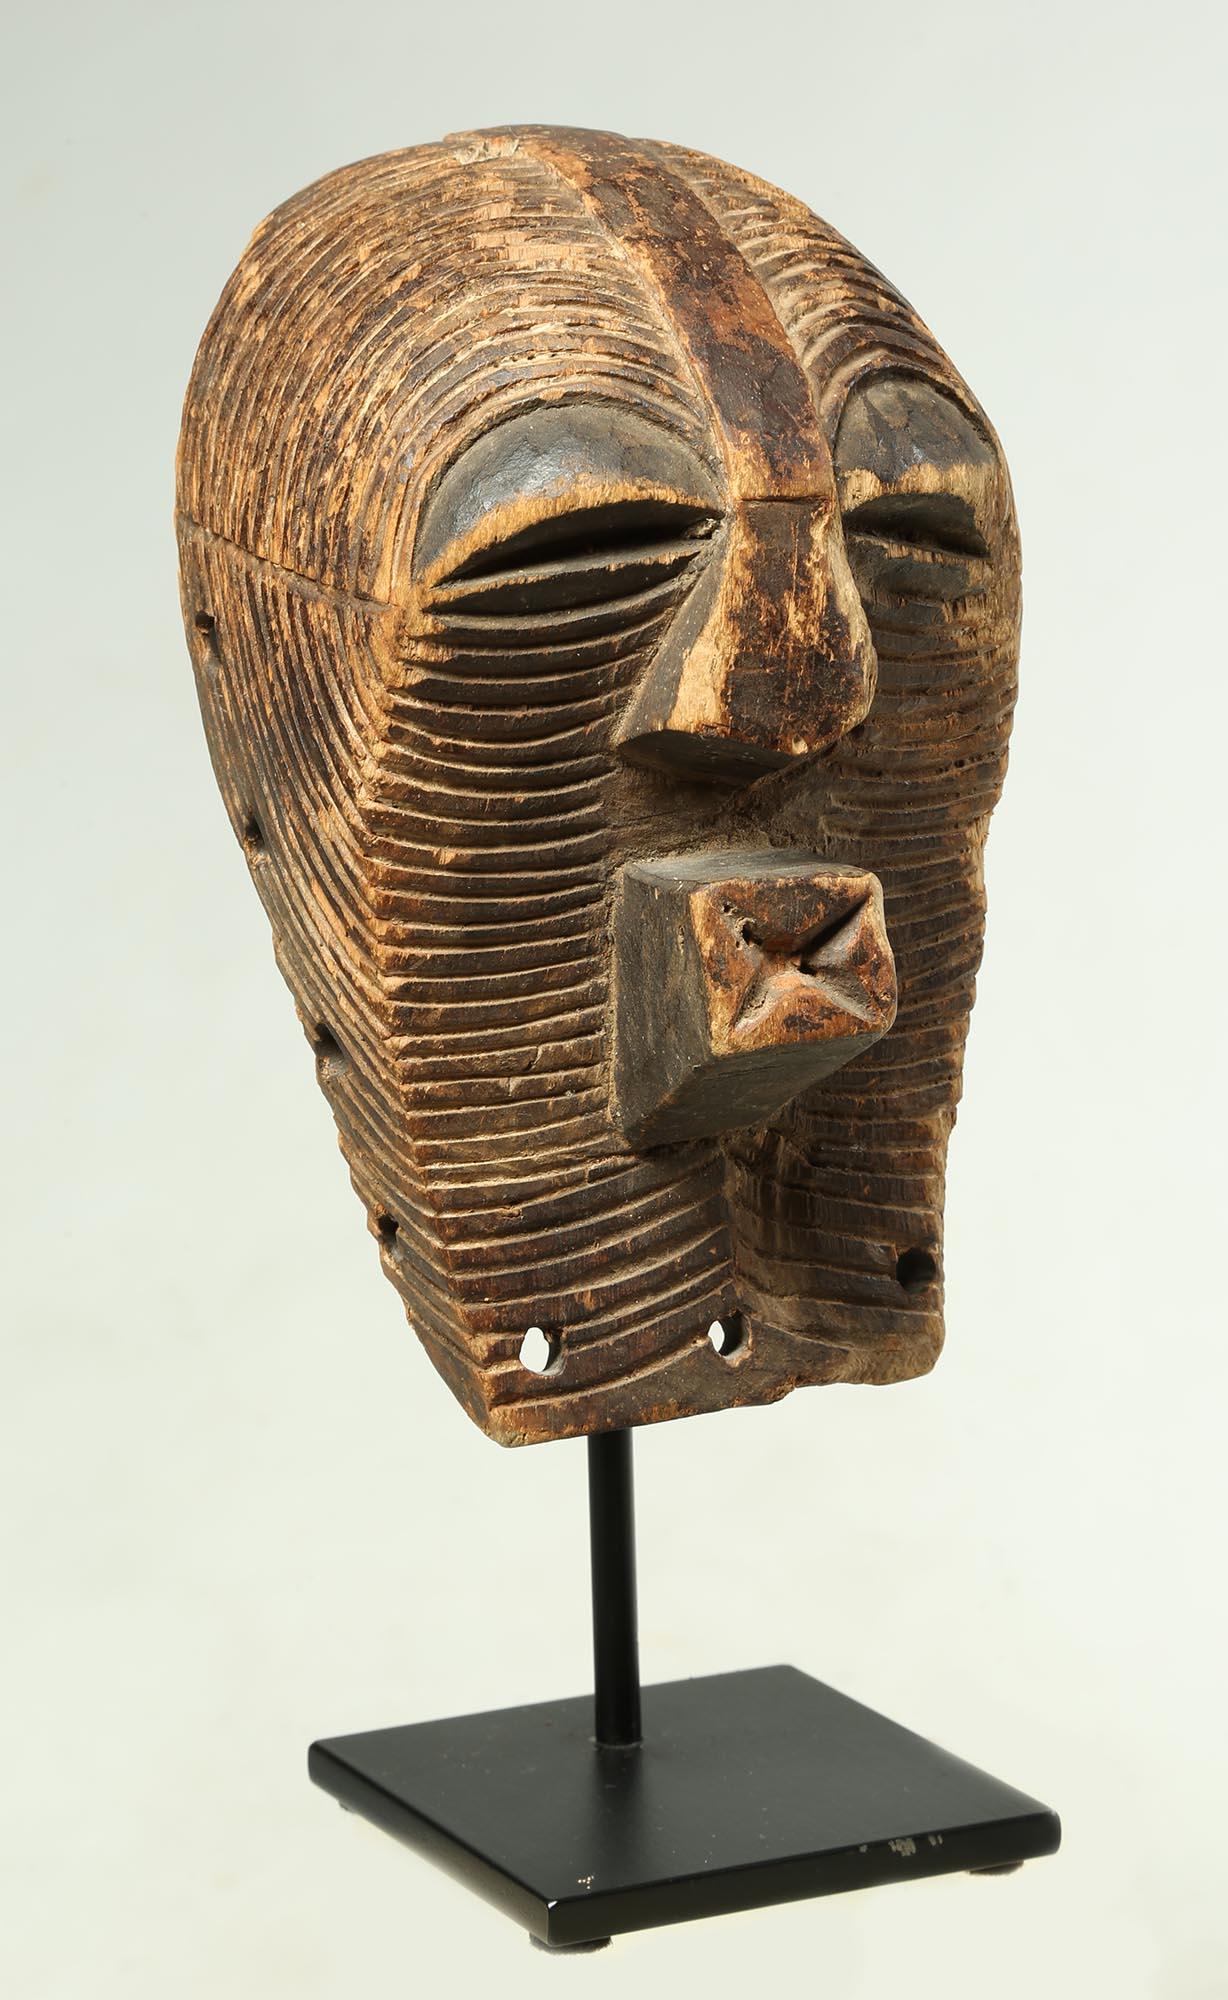 Hand-Carved Old Worn Small Songye Kifwebe Mask with Fine Striations Around Face Cubist Mouth